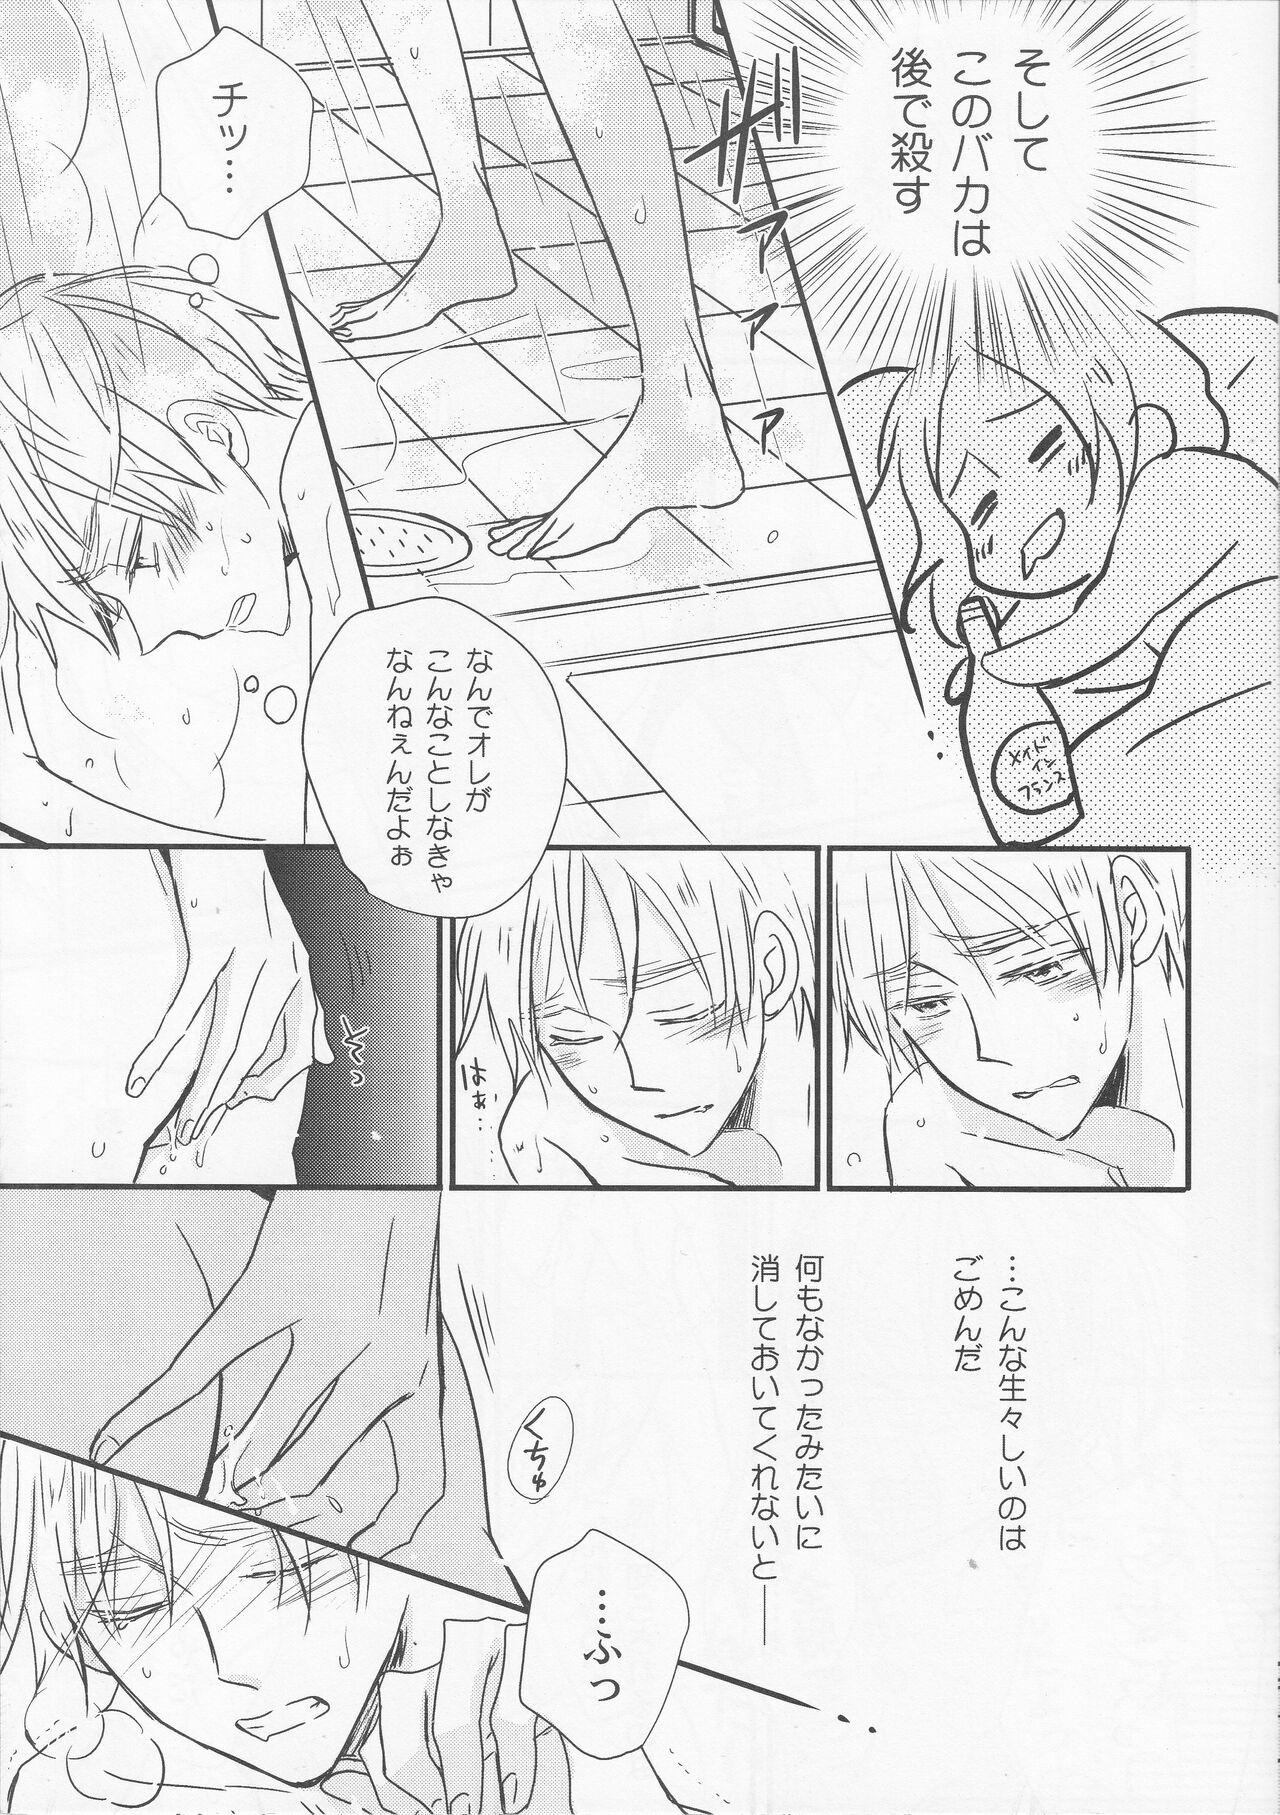 Gritona unknown title - Axis powers hetalia Black Gay - Page 6